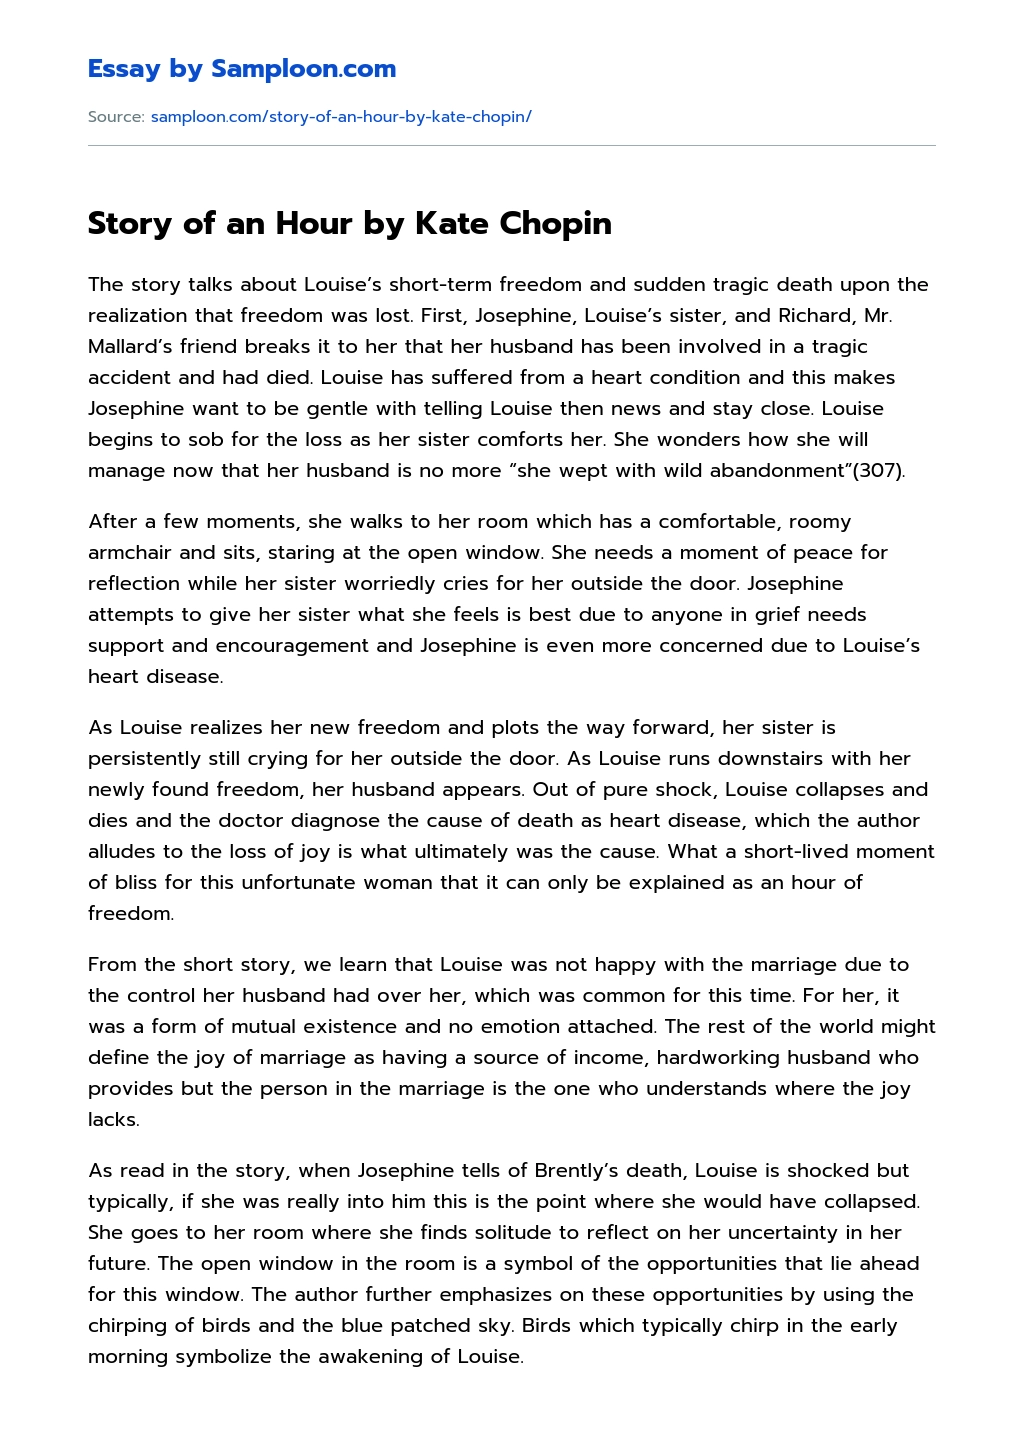 Story of an Hour by Kate Chopin essay